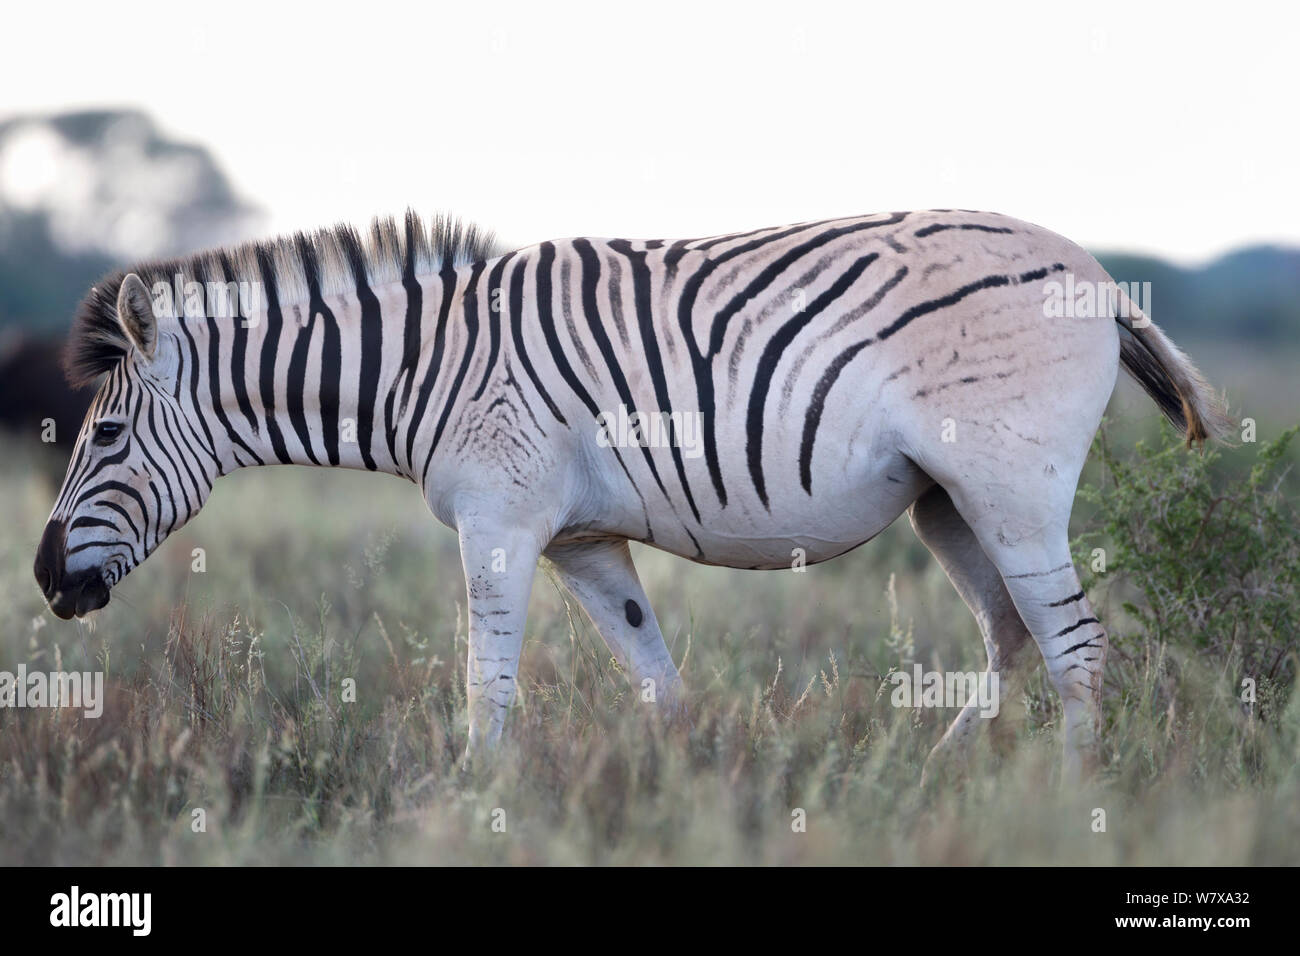 Pale rumped zebra (Equus quagga), part of the Quagga Project which aims to bring back the quagga, a sub-species of the plains zebra (Equus quagga burchelli), Mokala National Park, Northern province, South Africa, February Stock Photo